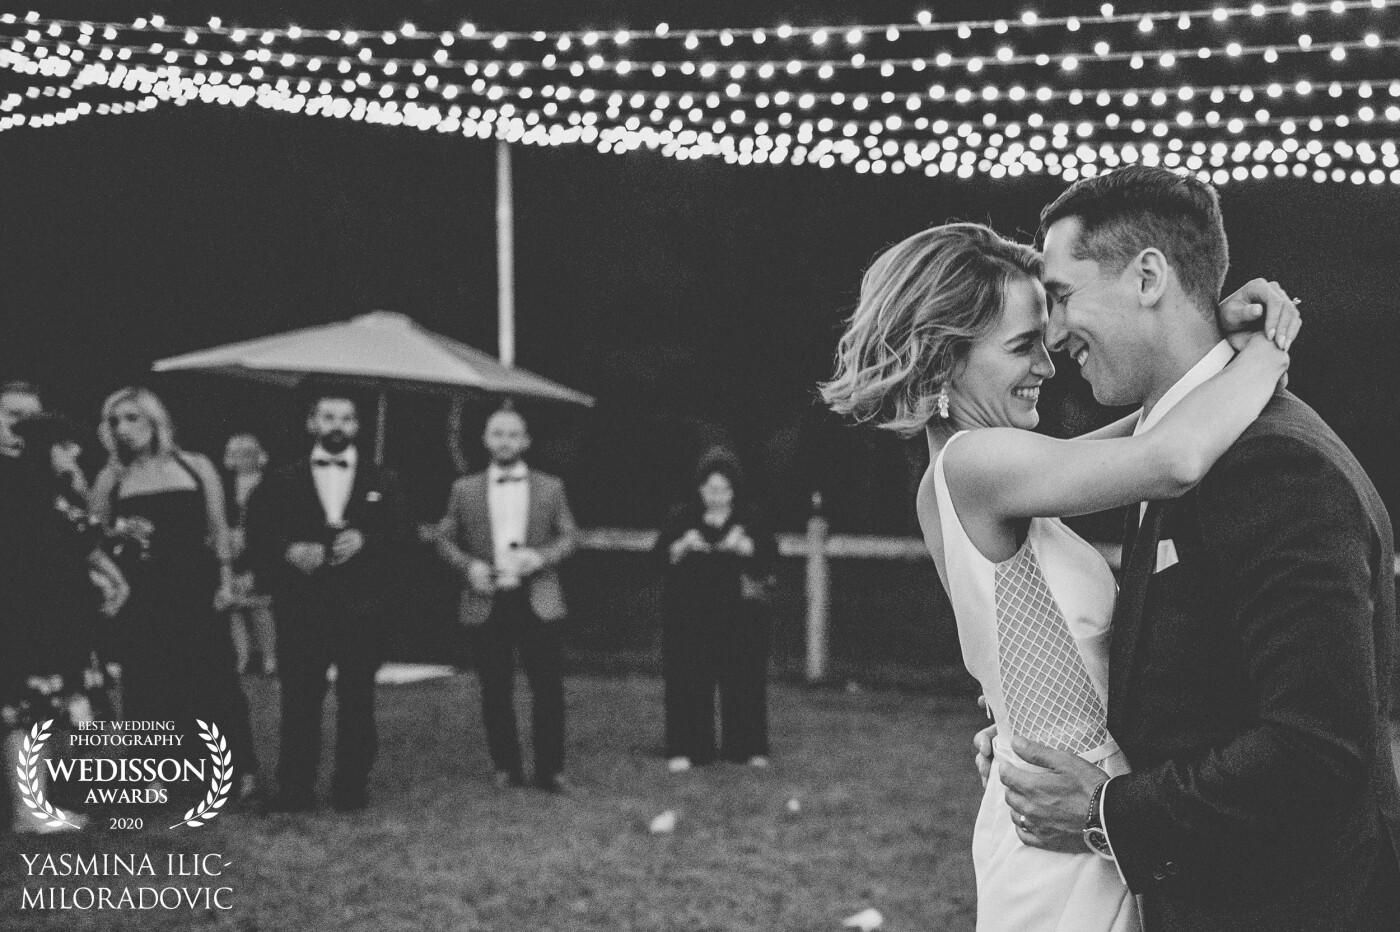 What a memorable first dance.. under the stars (and many twinkly lights!) in Adrian's parent's backyard whilst all their nearest and dearest looked on. So much love. 